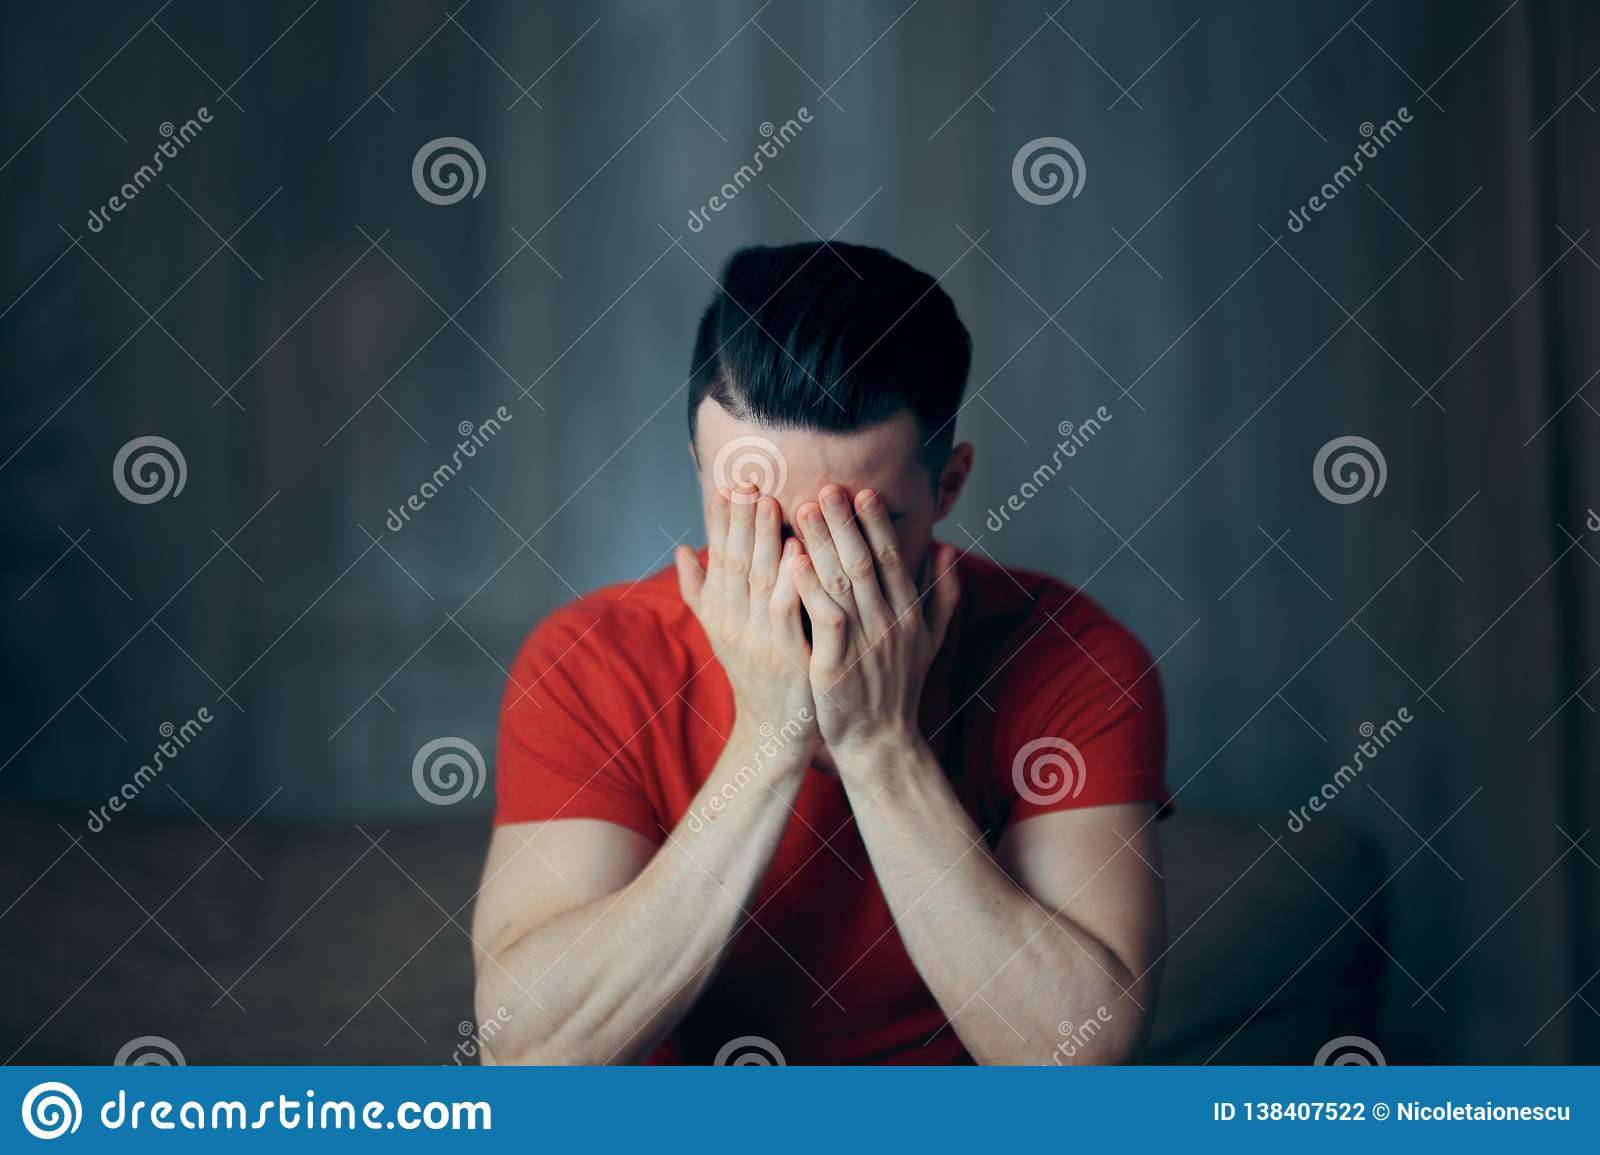 Sad Depressed Man Feeling Anxious And Stressed Out Stock Photo